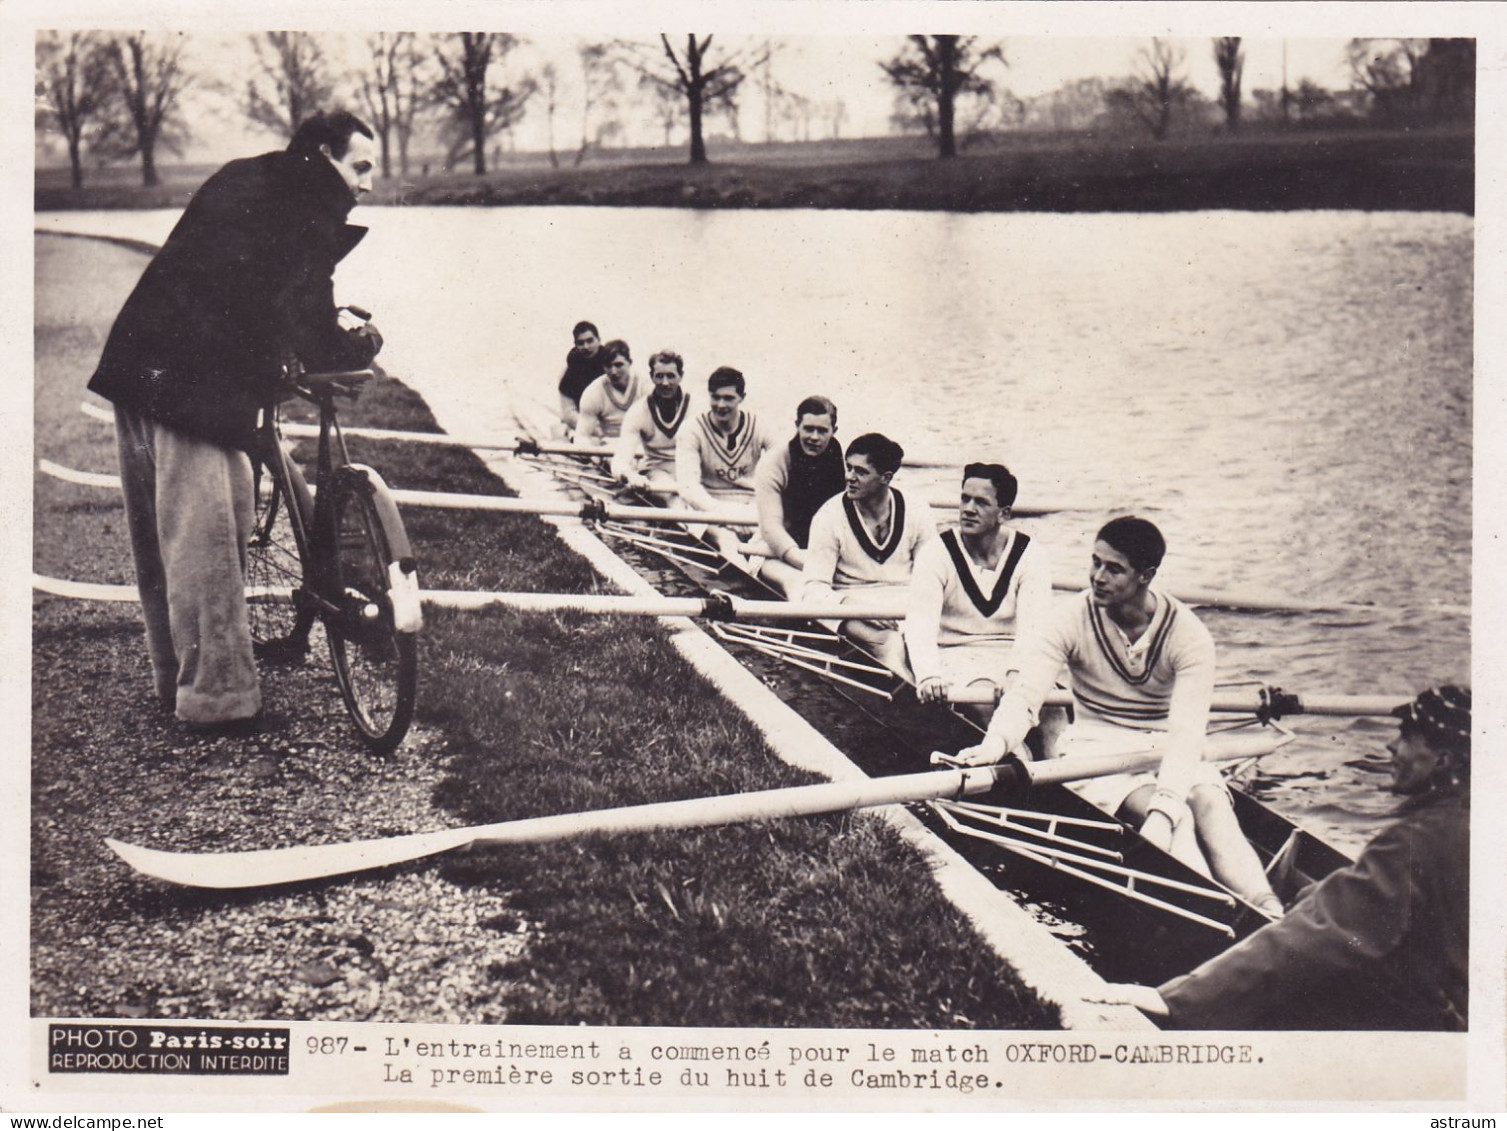 Cpa / Photo - Ang - Cambridge - Sport Aviron - 1st Outing Training For The Cambridge Team - Rudersport